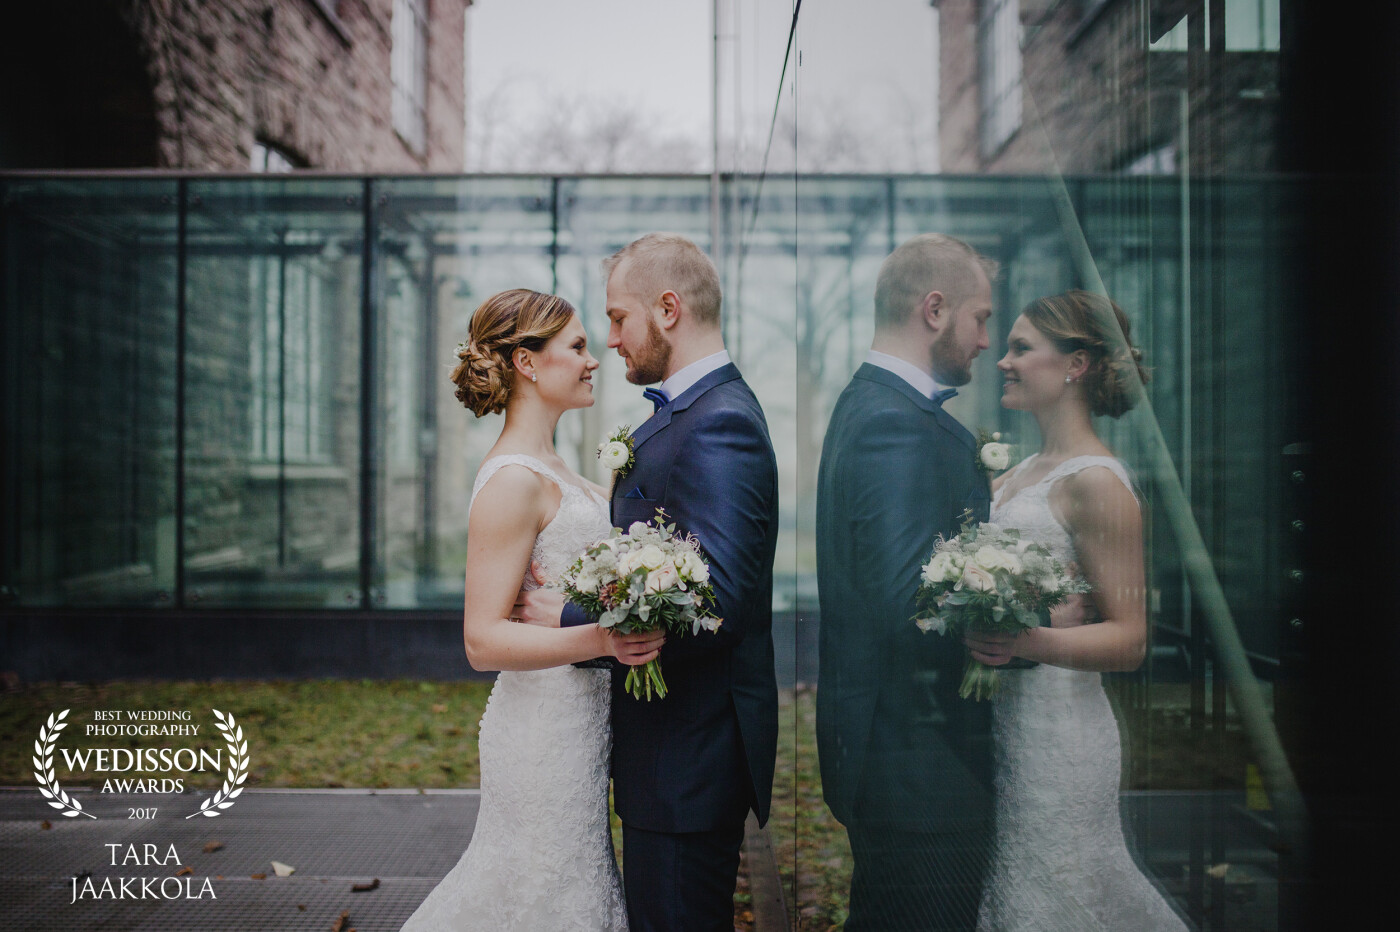 On February Eeva and Saura celebrated their wedding at an old voluntary fire brigade's banquet hall. Before the party started we went to take portraits behind an local art museum. The weather was cold and misty but these two love birds didn't complain at all. 